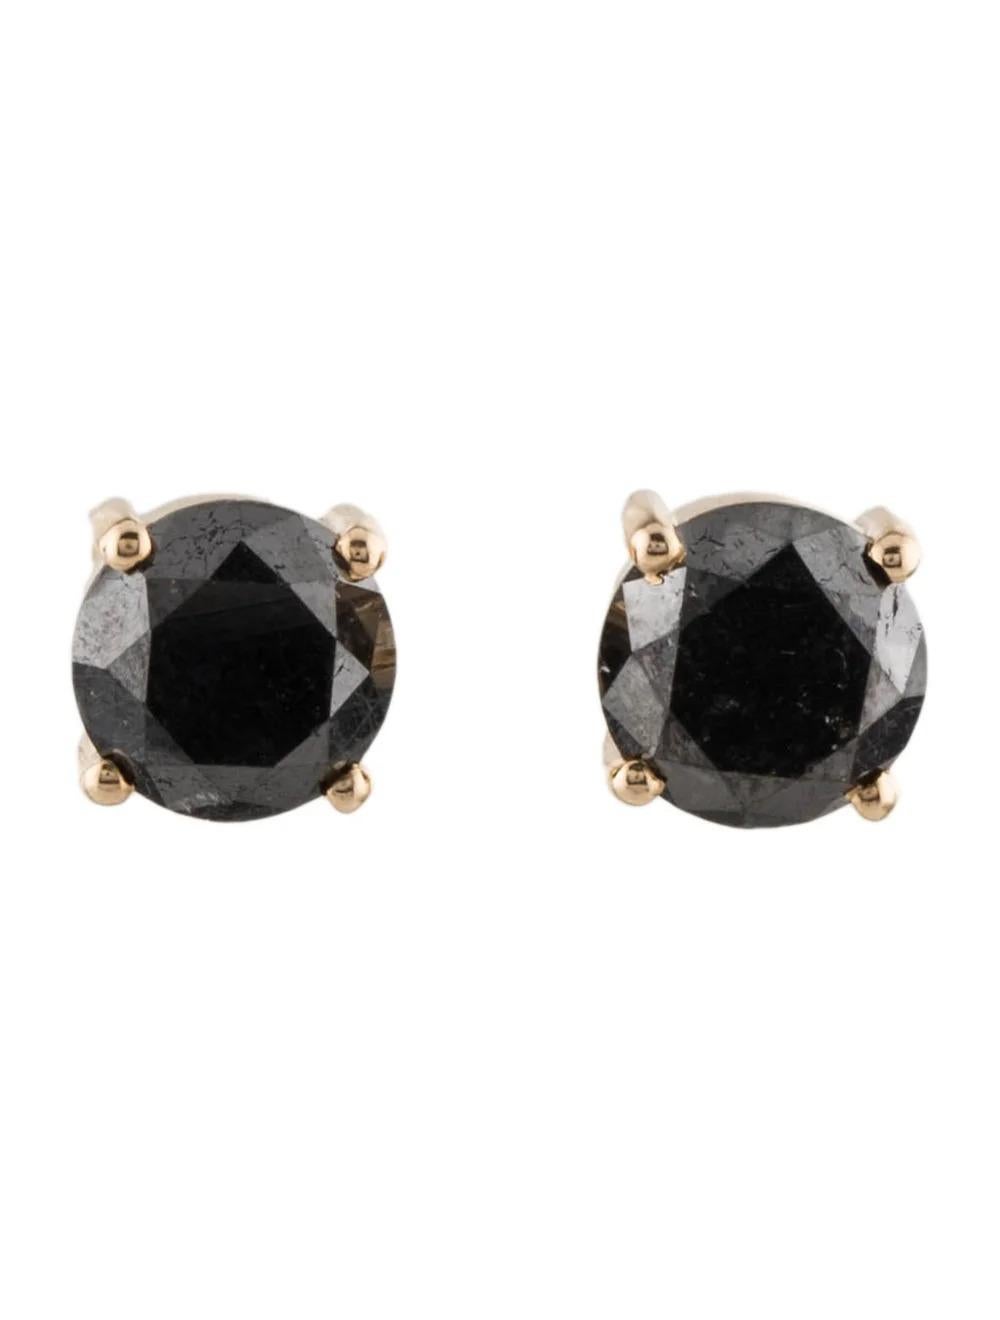 Introducing a stunning pair of 14K Yellow Gold Diamond Stud Earrings, a timeless addition to any jewelry collection.

Specifications:

* Metal: 14K Yellow Gold
* Length: 0.25